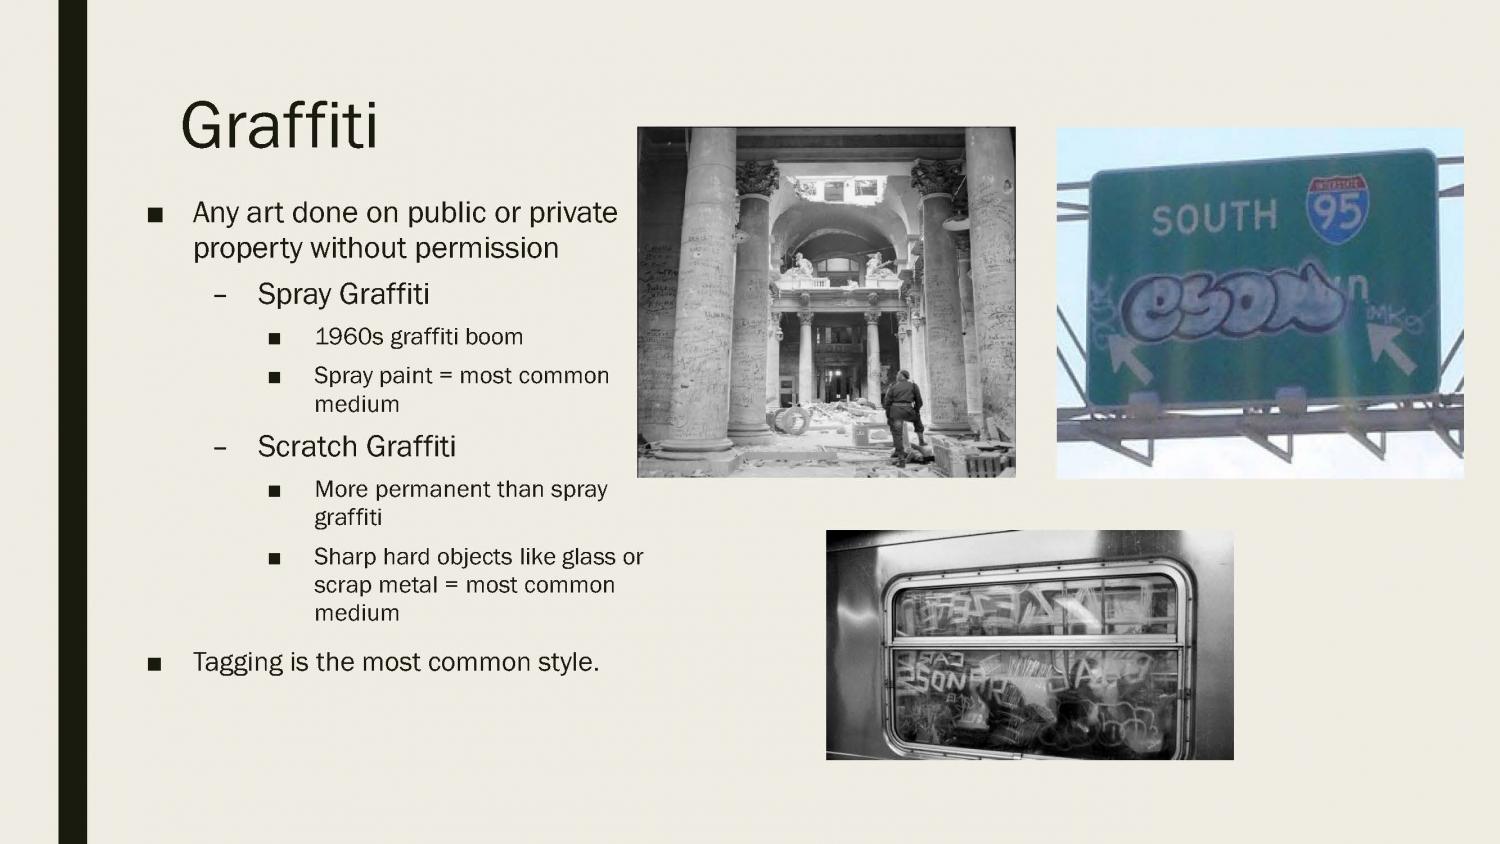 Image of PowerPoint slide on Graffiti from Robert Kirk's Spring 2021 Symposium "Everyday Life" panel discussion presentation on Graffiti and Street Art. Slide contains definition of graffiti as "any art done on public or private property without permission. Lists types of graffiti including spray graffiti, scratch graffiti and mention of "tagging." 3 black and white images of inner city graffiti. Link to full PowerPoint presentation given on March 17, 2021.